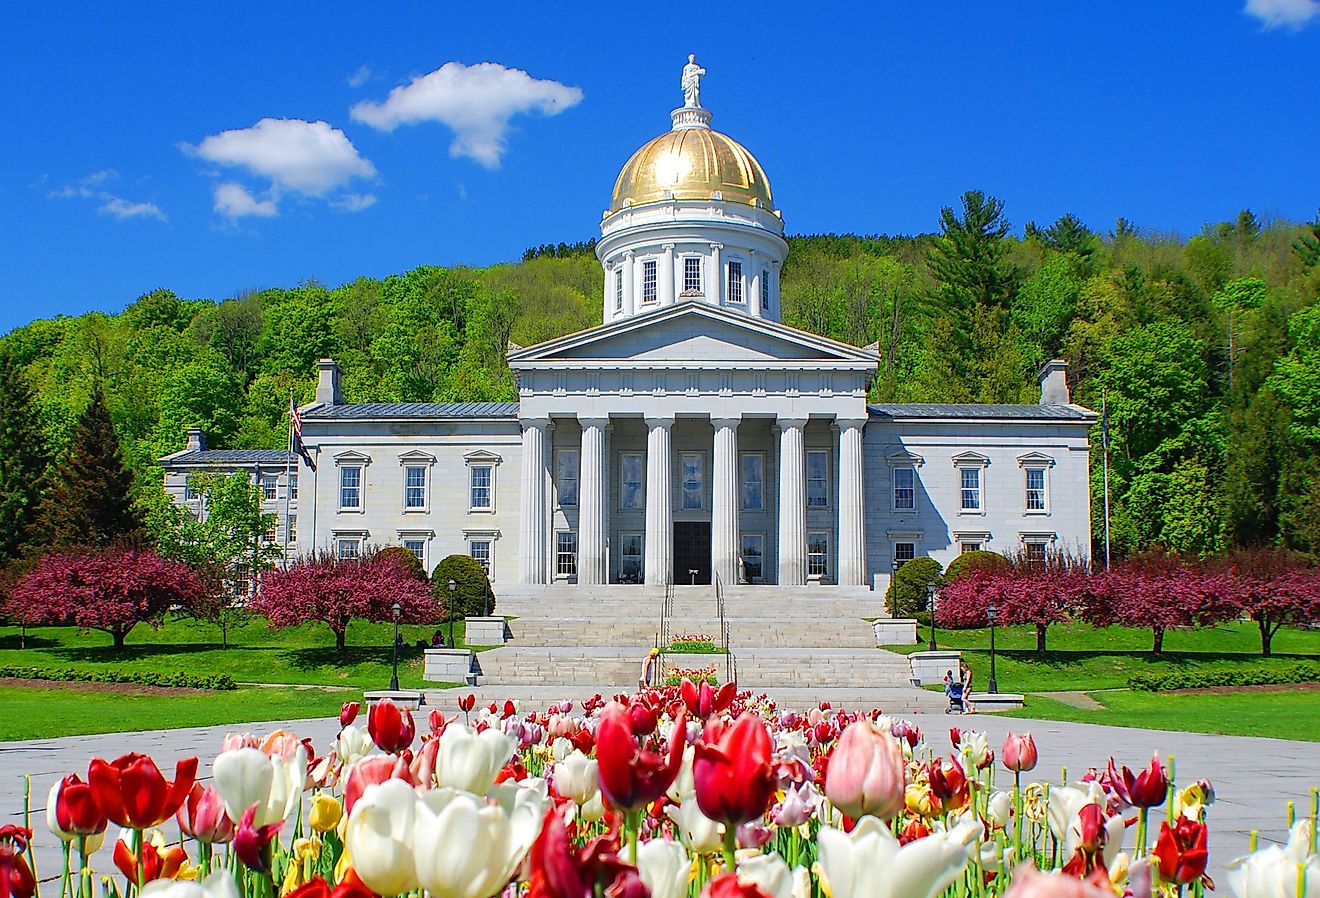 Vermont State House, Montpelier, Vermont, with tulips blooming. Image credit meunierd via Shutterstock